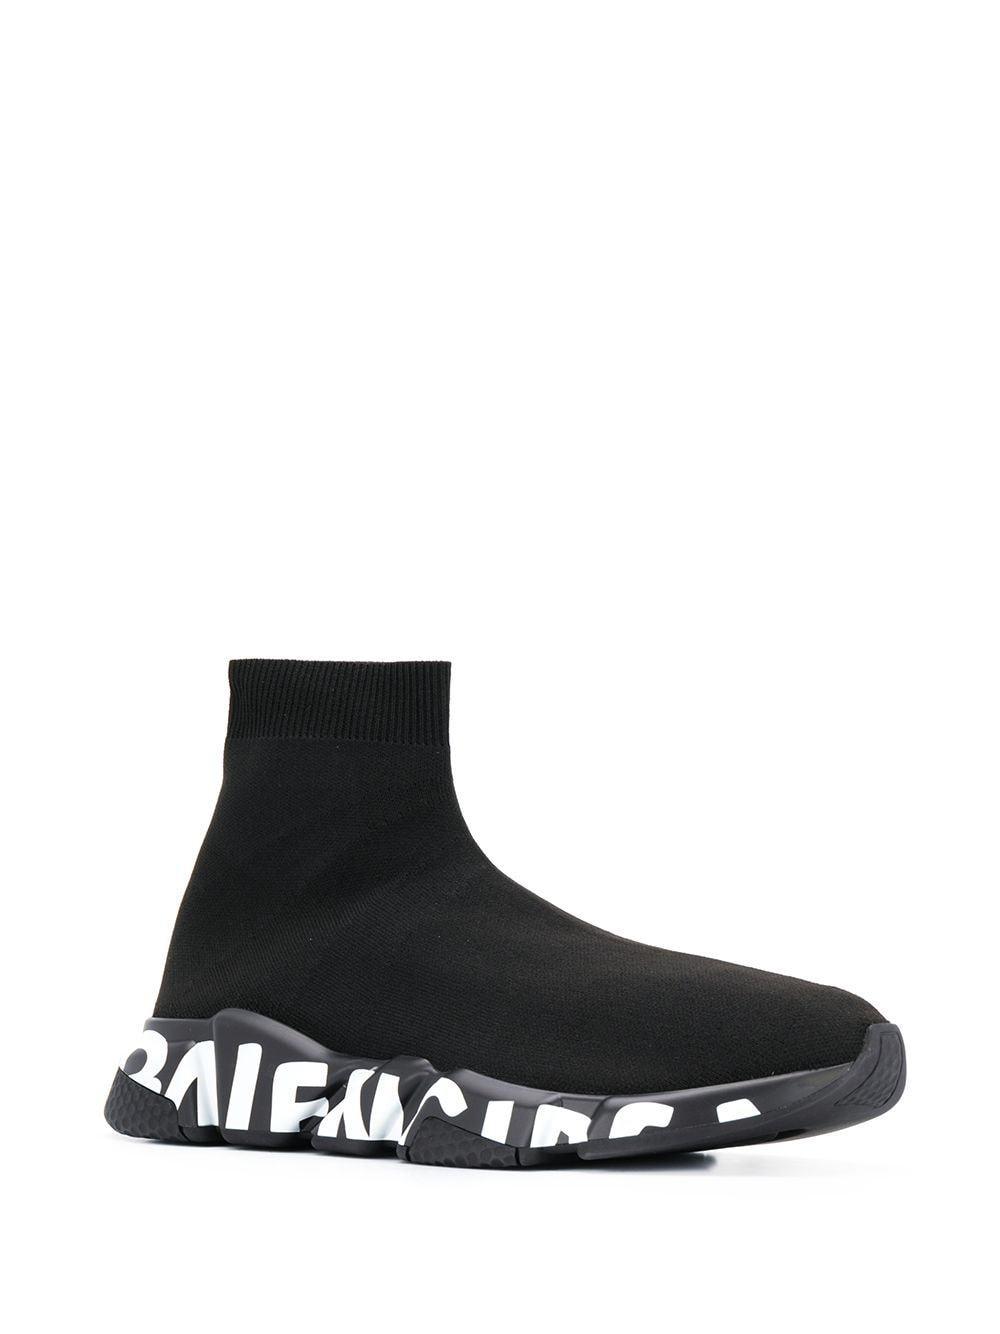 Balenciaga Synthetic Graffiti-sole Speed Sneakers in Black_white (Black)  for Men - Save 34% - Lyst